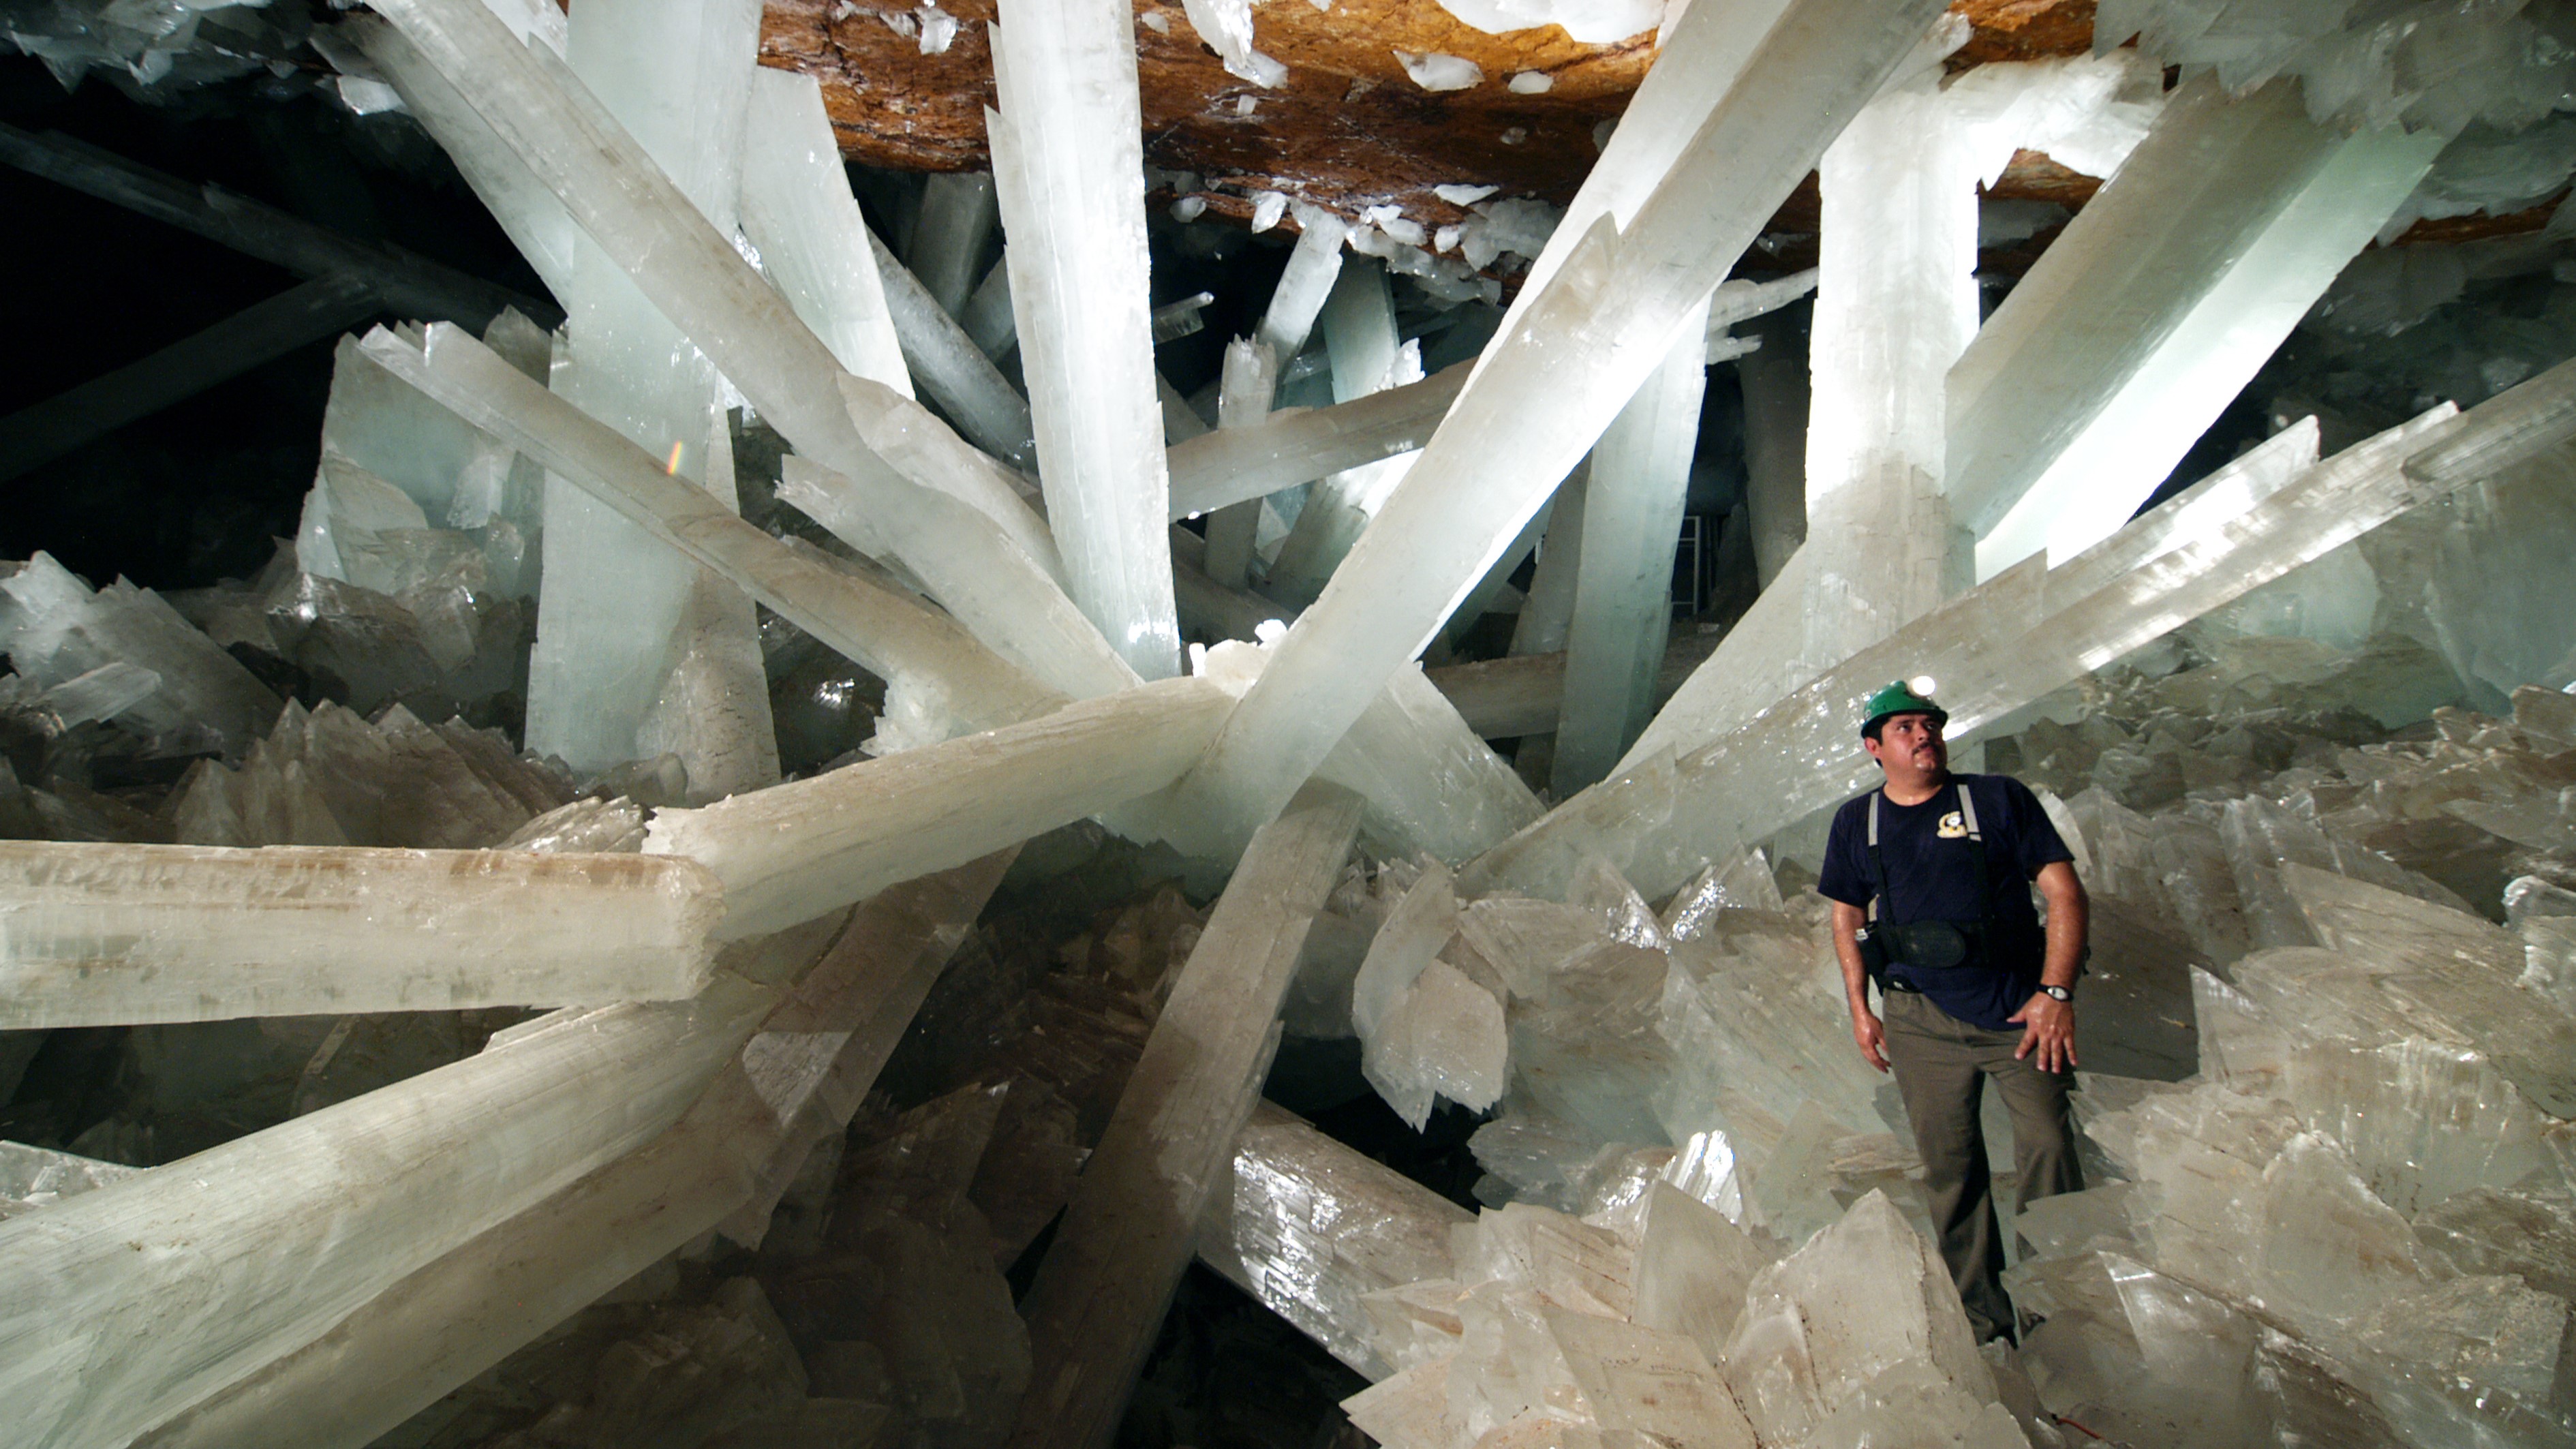 The interior of the Cave of Crystals with a geologist in the foreground.